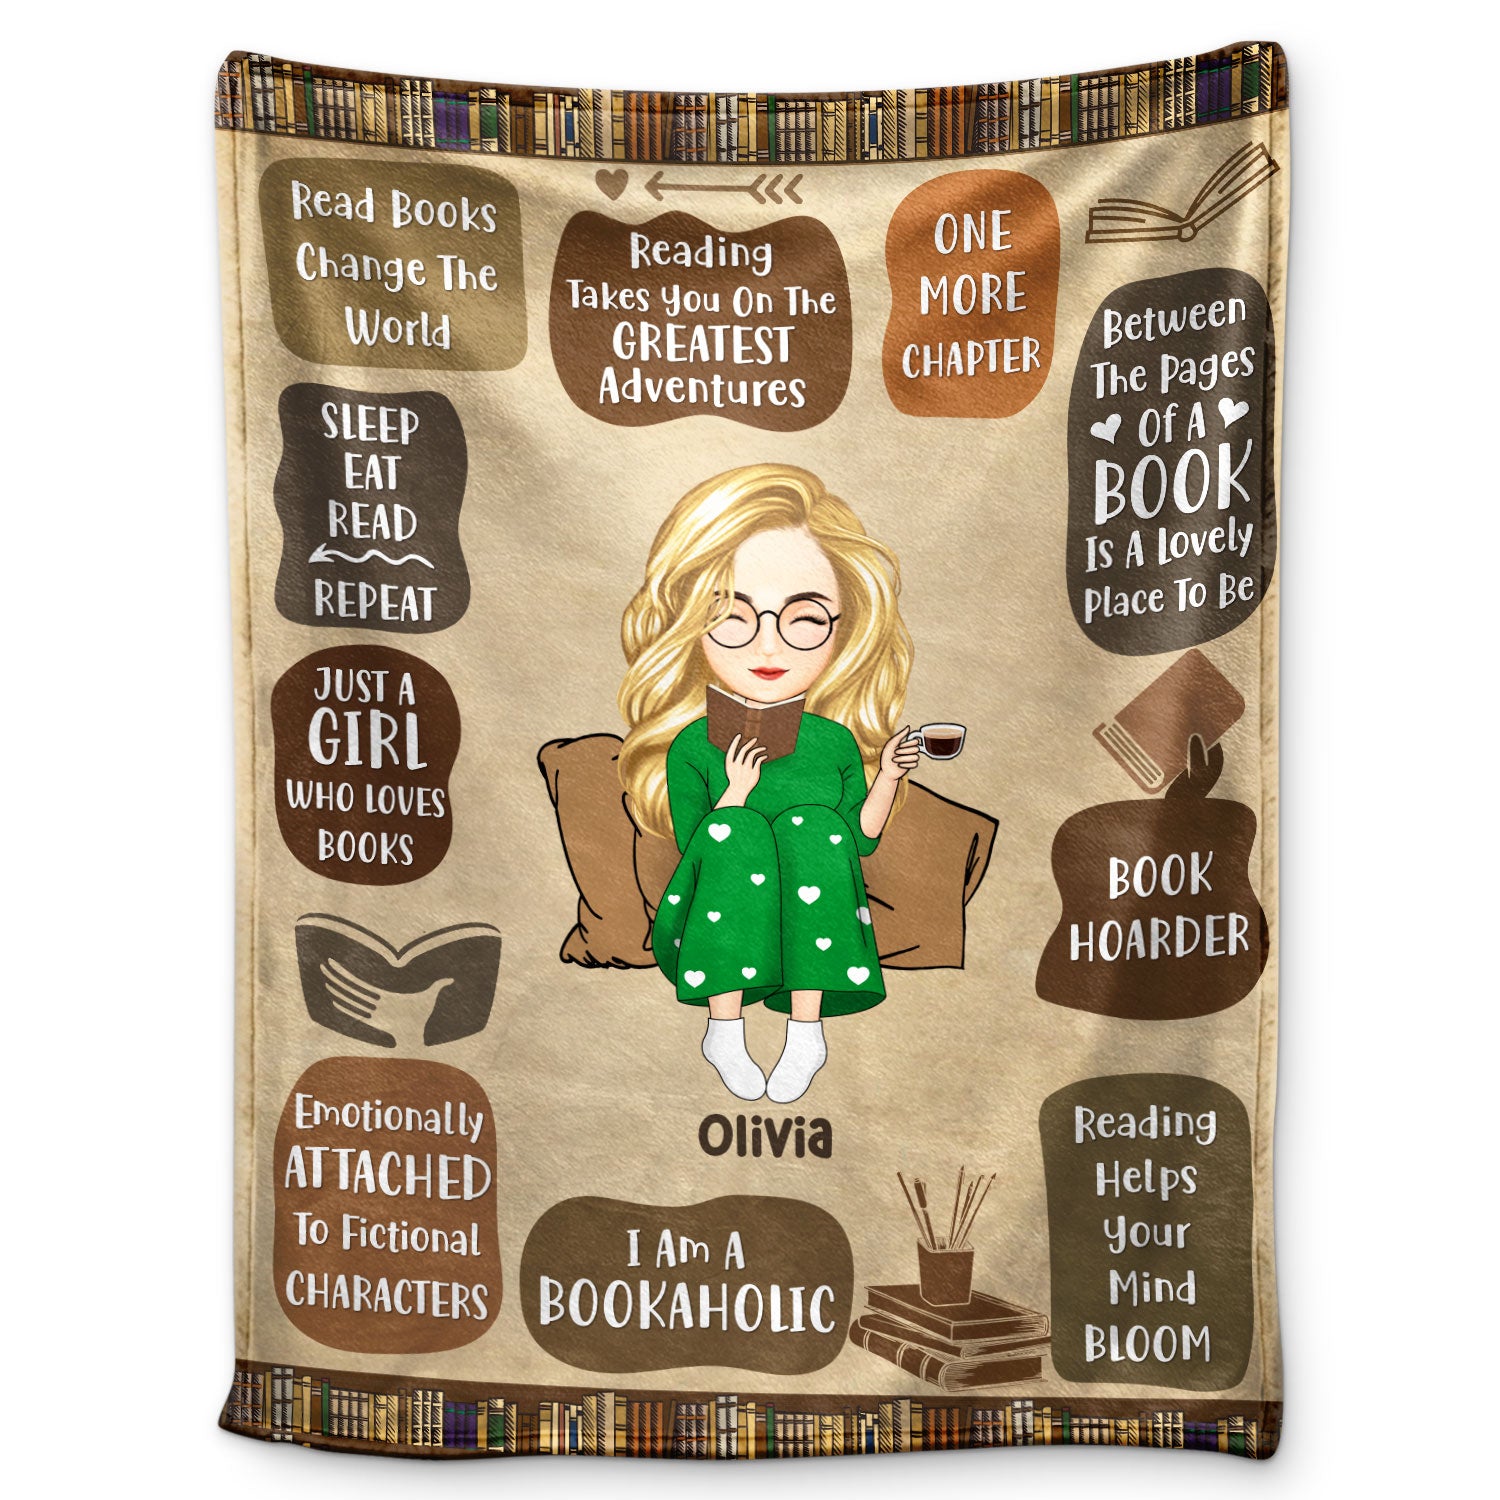 Chibi Reading My Reading Blanket - Gift For Book Lovers - Personalized Fleece Blanket